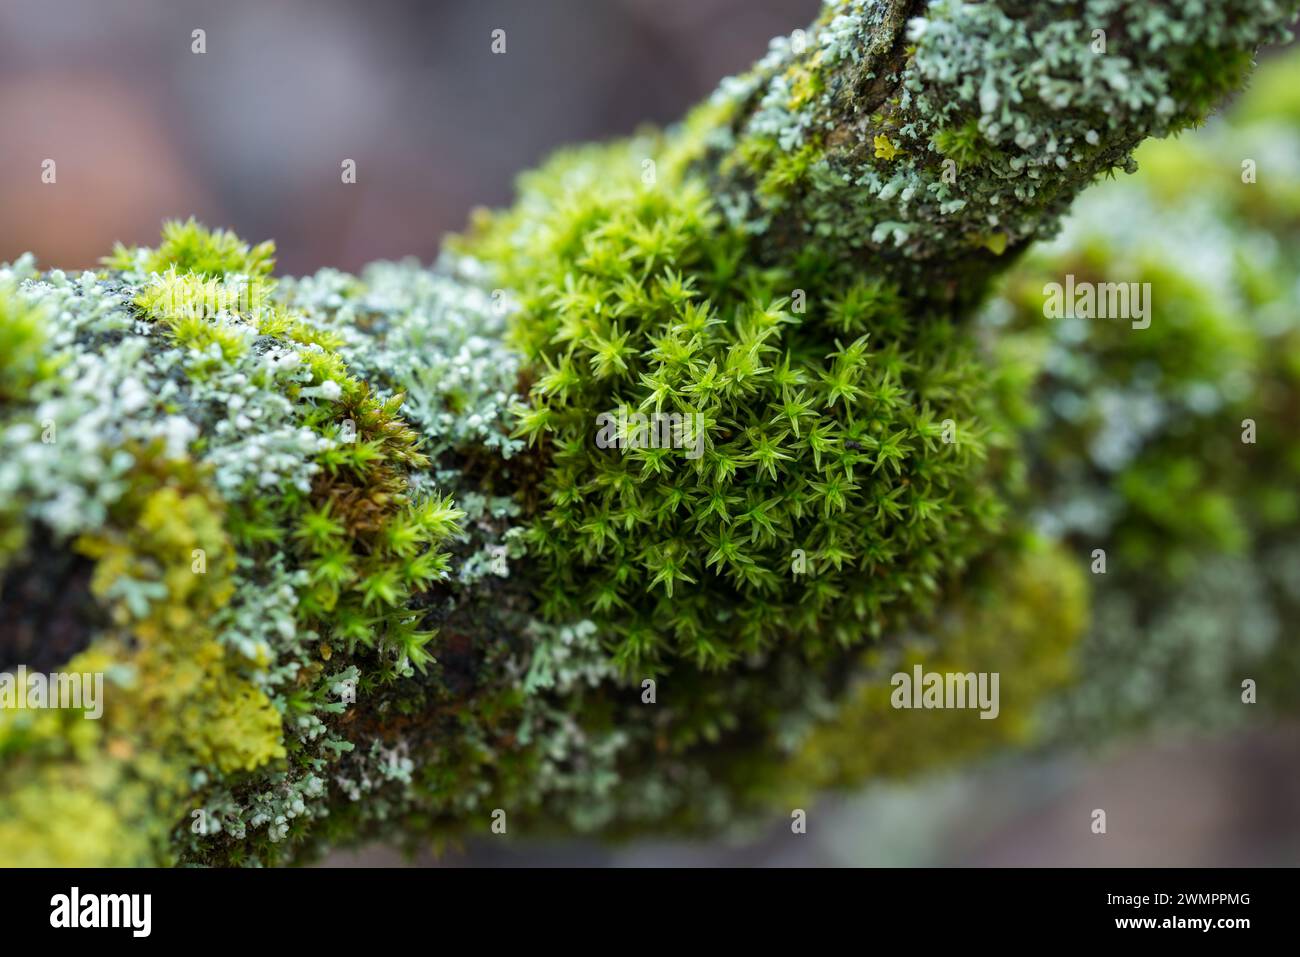 lichen species and moss on tree branch closeup selective focus Stock Photo